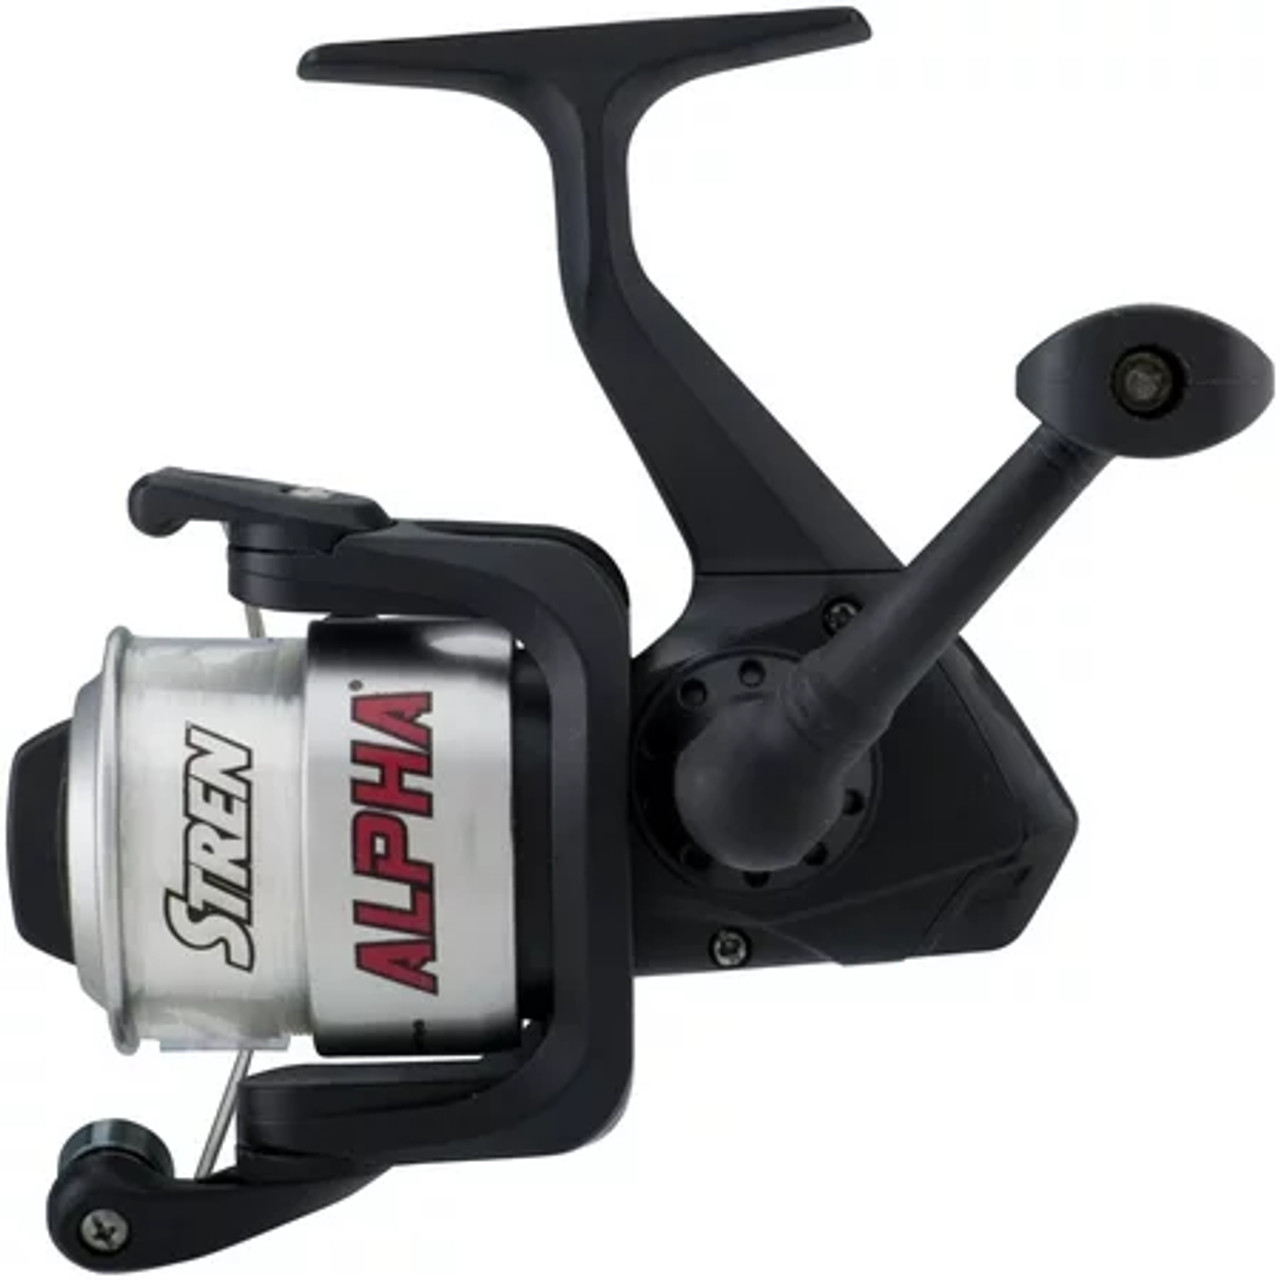 Shakespeare Alpha Spinning Reel 1BB, Size 70, 4.1:1